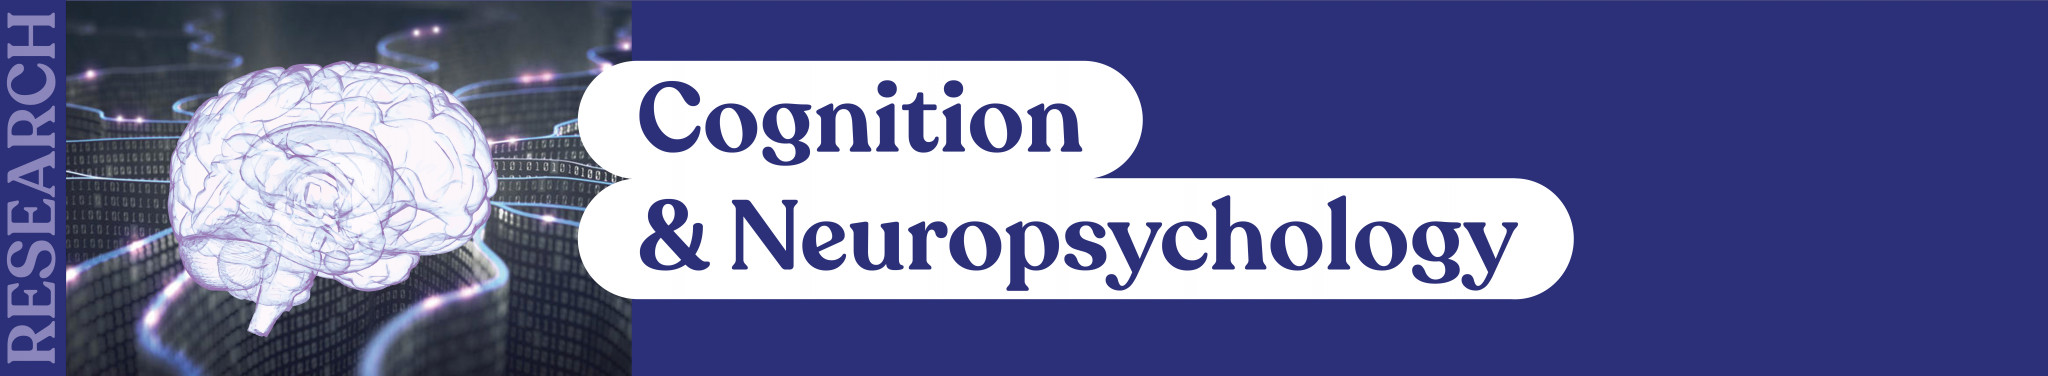 Cognition and Neuropsychology Banner